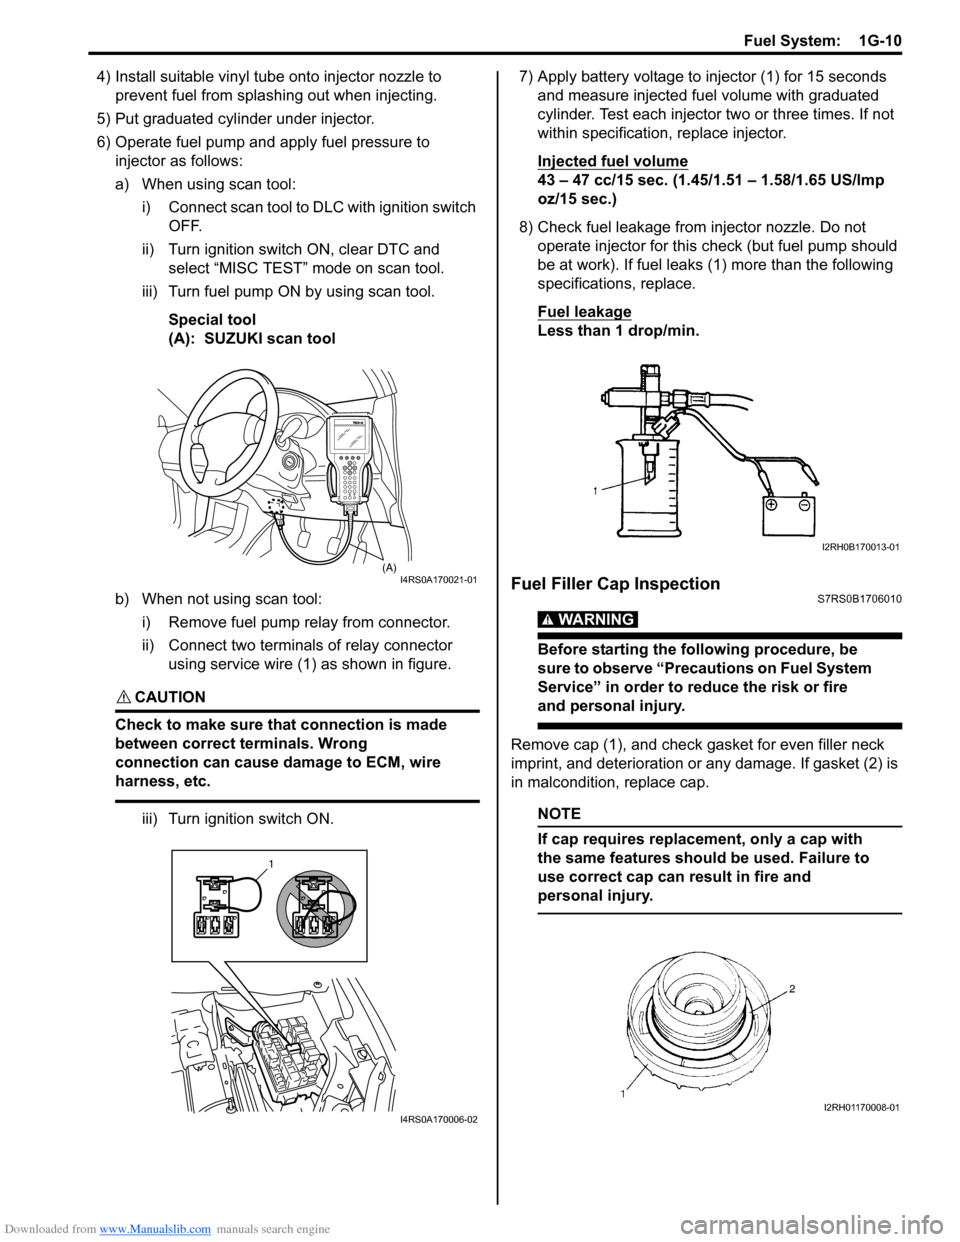 SUZUKI SWIFT 2006 2.G Service Workshop Manual Downloaded from www.Manualslib.com manuals search engine Fuel System:  1G-10
4) Install suitable vinyl tube onto injector nozzle to 
prevent fuel from splashing out when injecting.
5) Put graduated cy